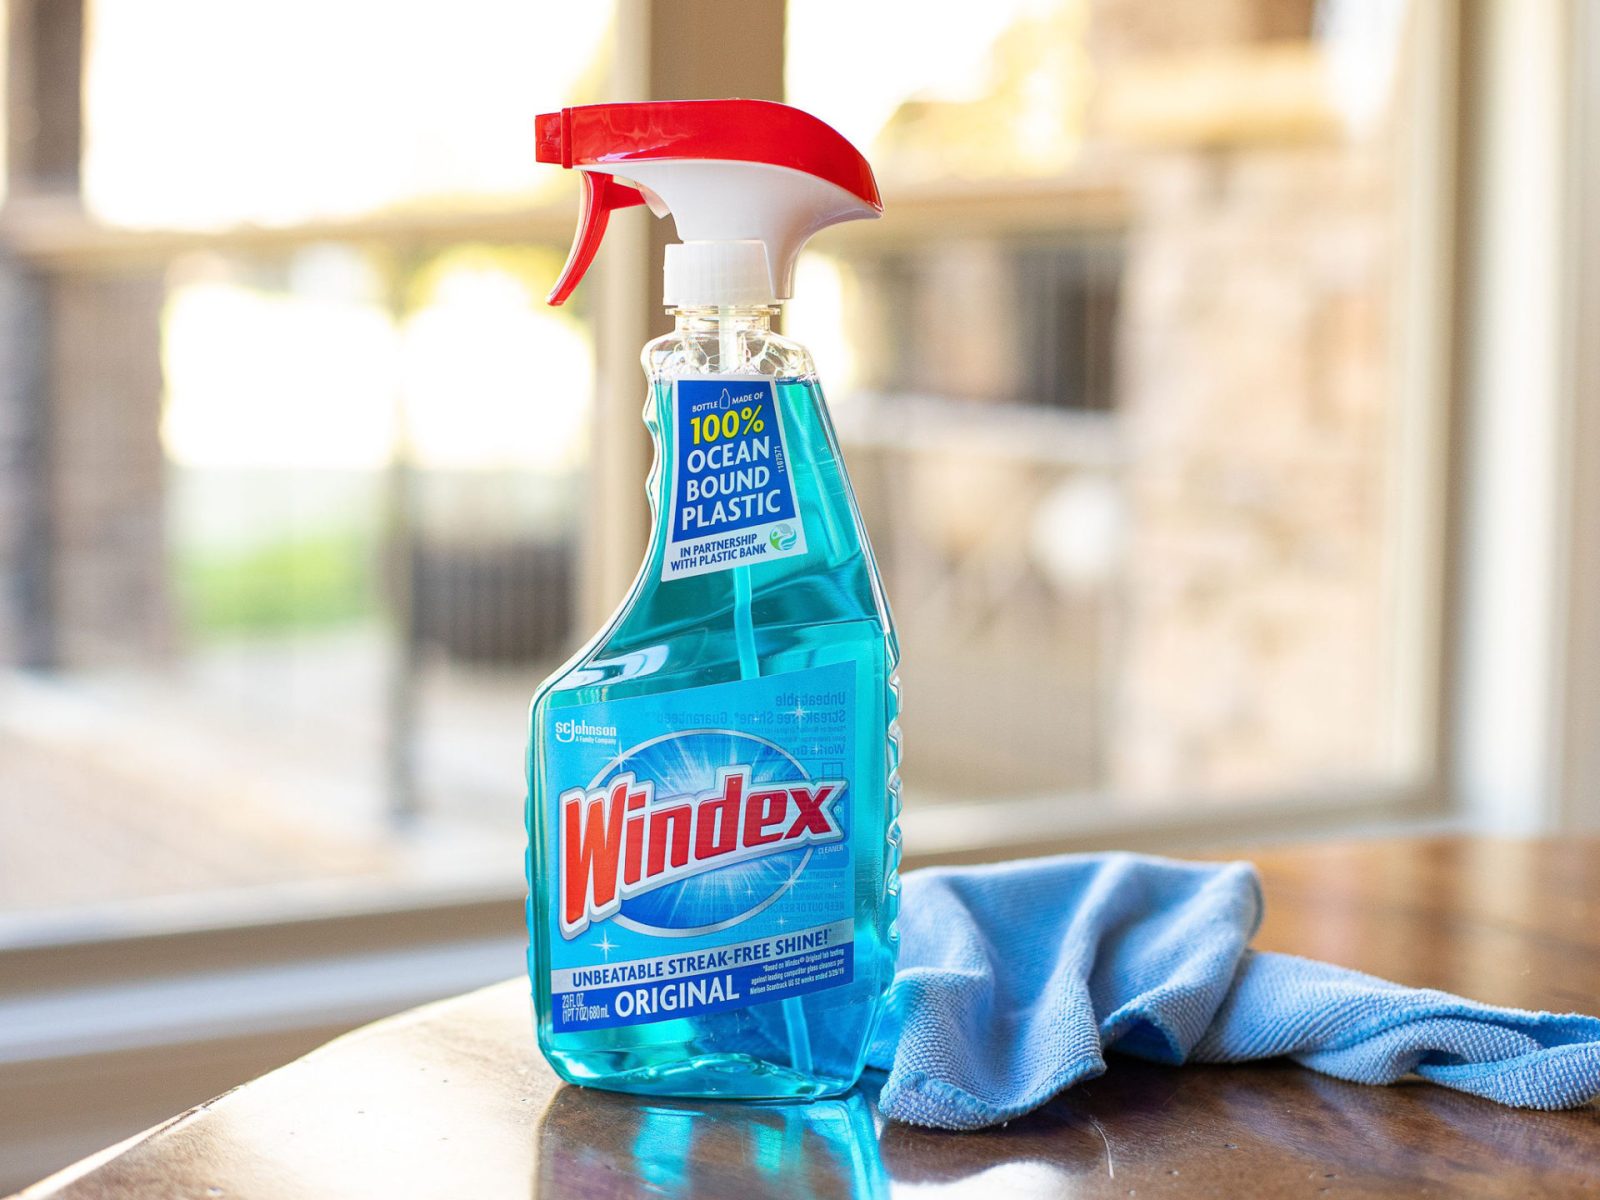 Grab A Deal On Windex This Week At Publix – Save Almost $2 Per Bottle!